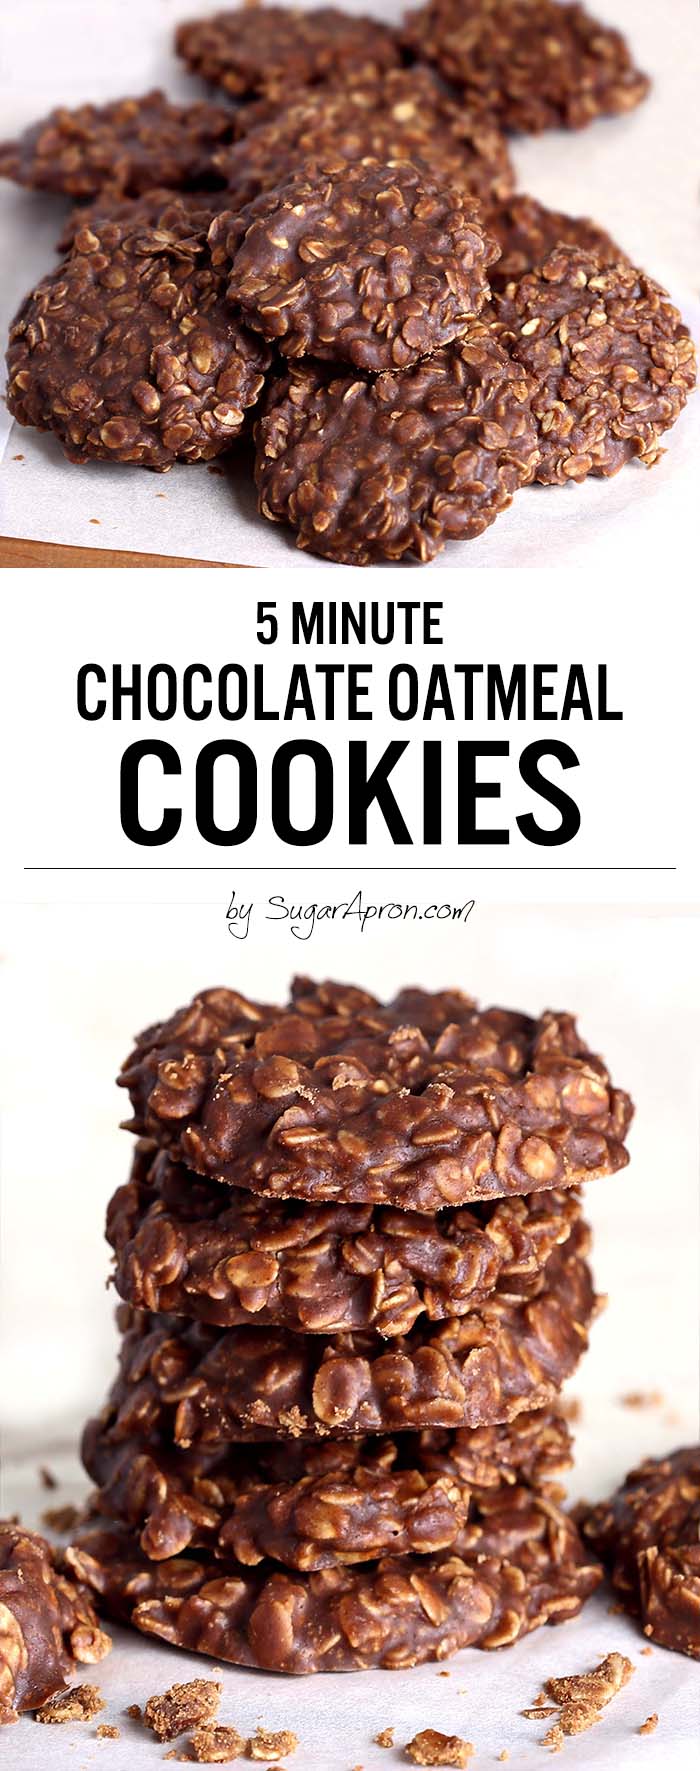 I do promise these No Bake Chocolate Oatmeal Cookies made with peanut butter, oatmeal and cocoa are the quickest, tastiest, no bake cookies you'll ever eat though! Kids absolutely love them.